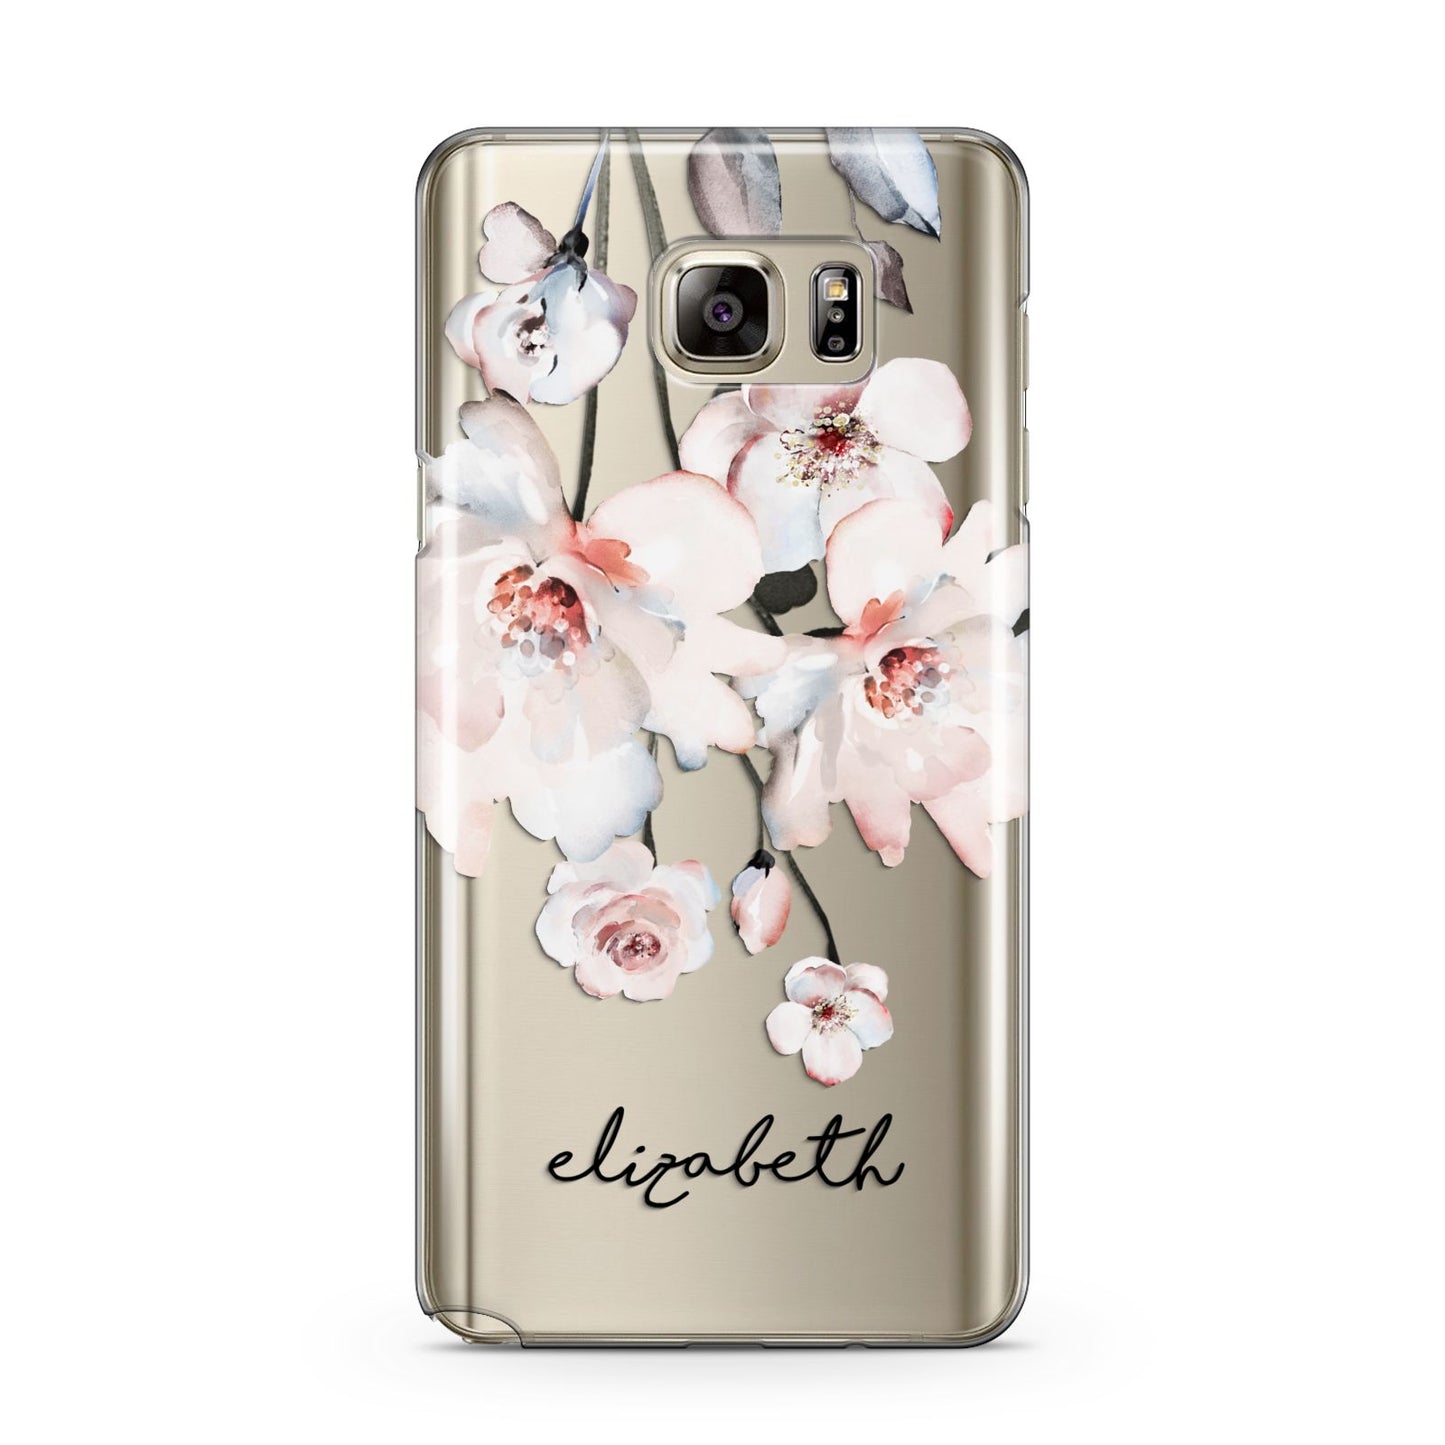 Personalised Name Roses Watercolour Samsung Galaxy Note 5 Case